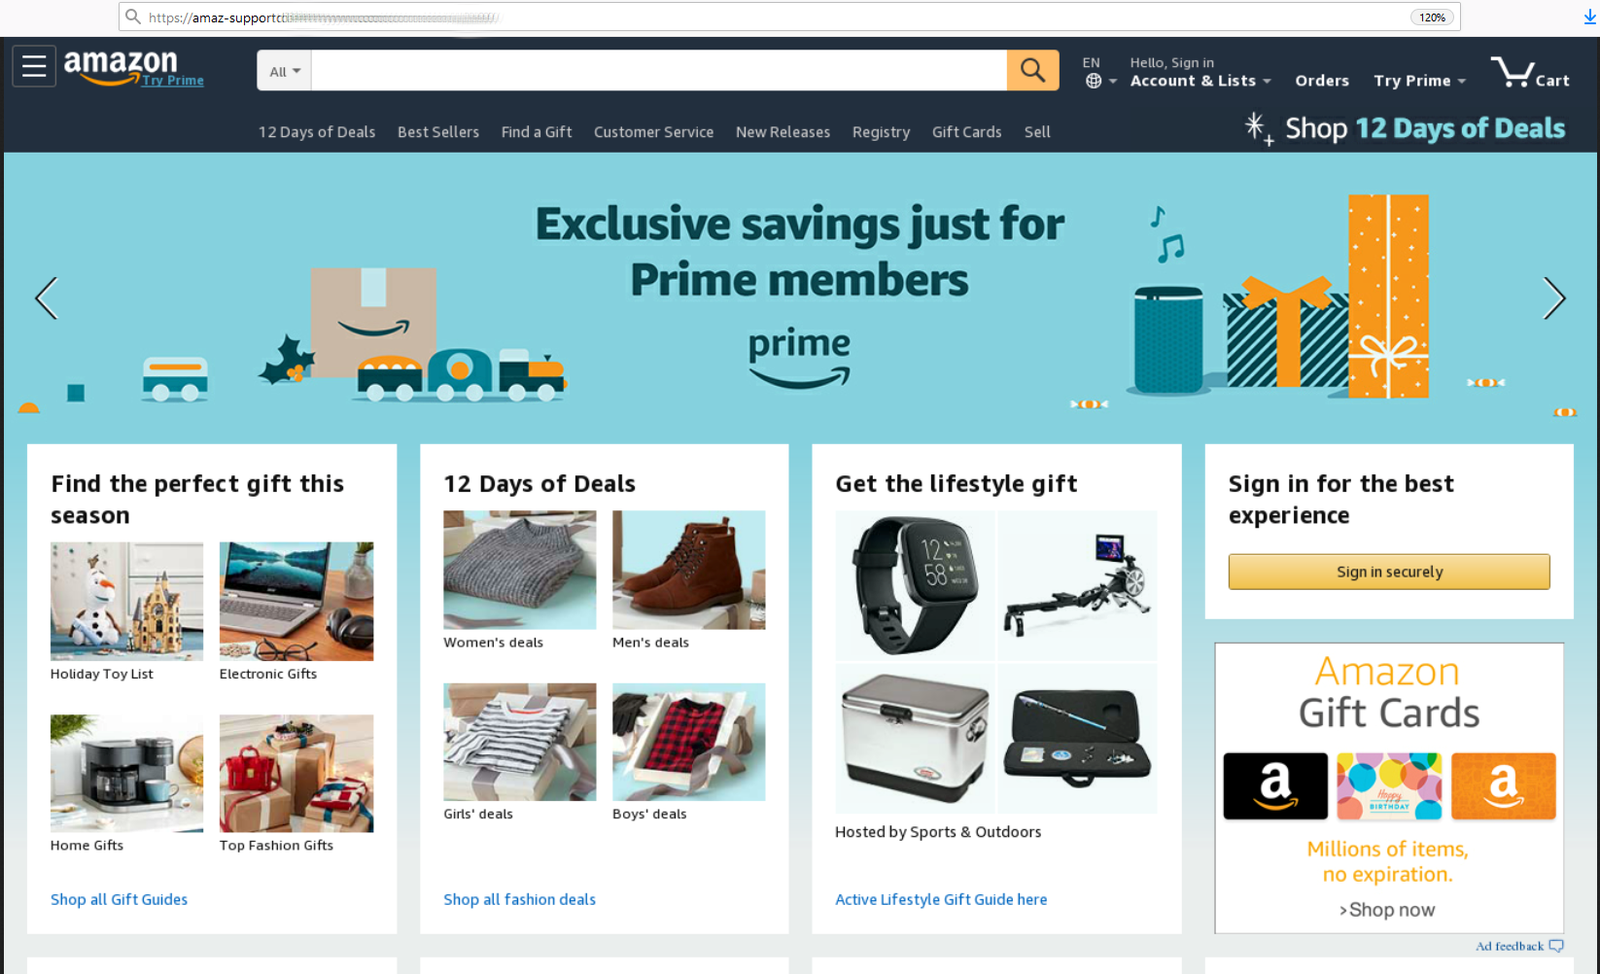 Amazon extends closure of French warehouses to May 5